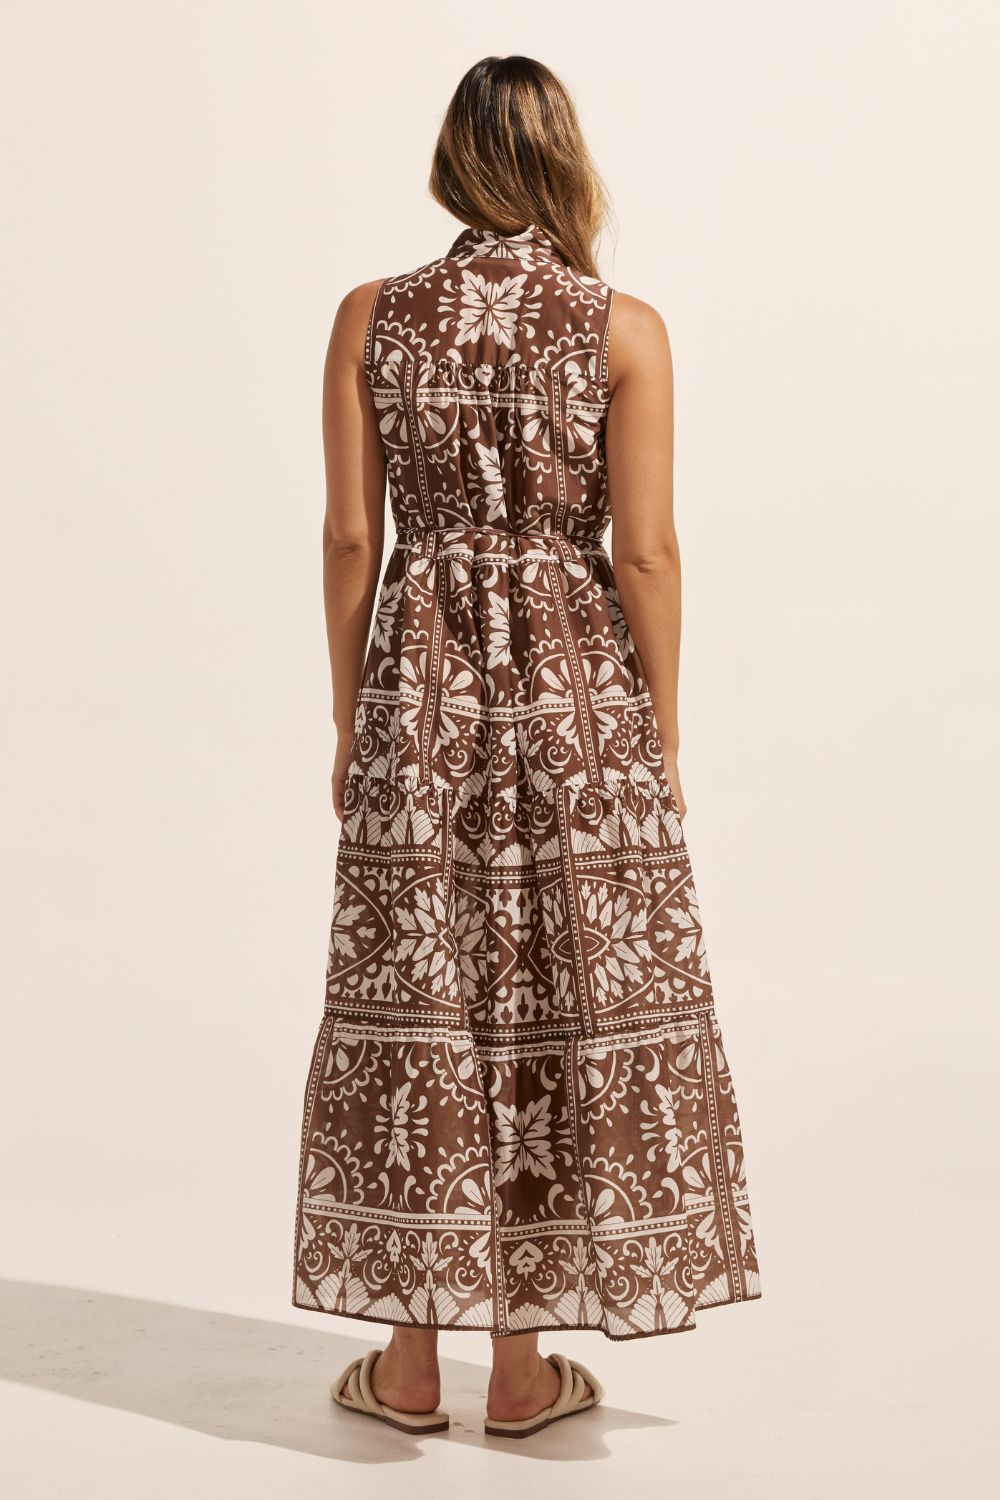 brown and white print, high neck, buttons down centre, thin fabric belt, sleeveless, dress, back view